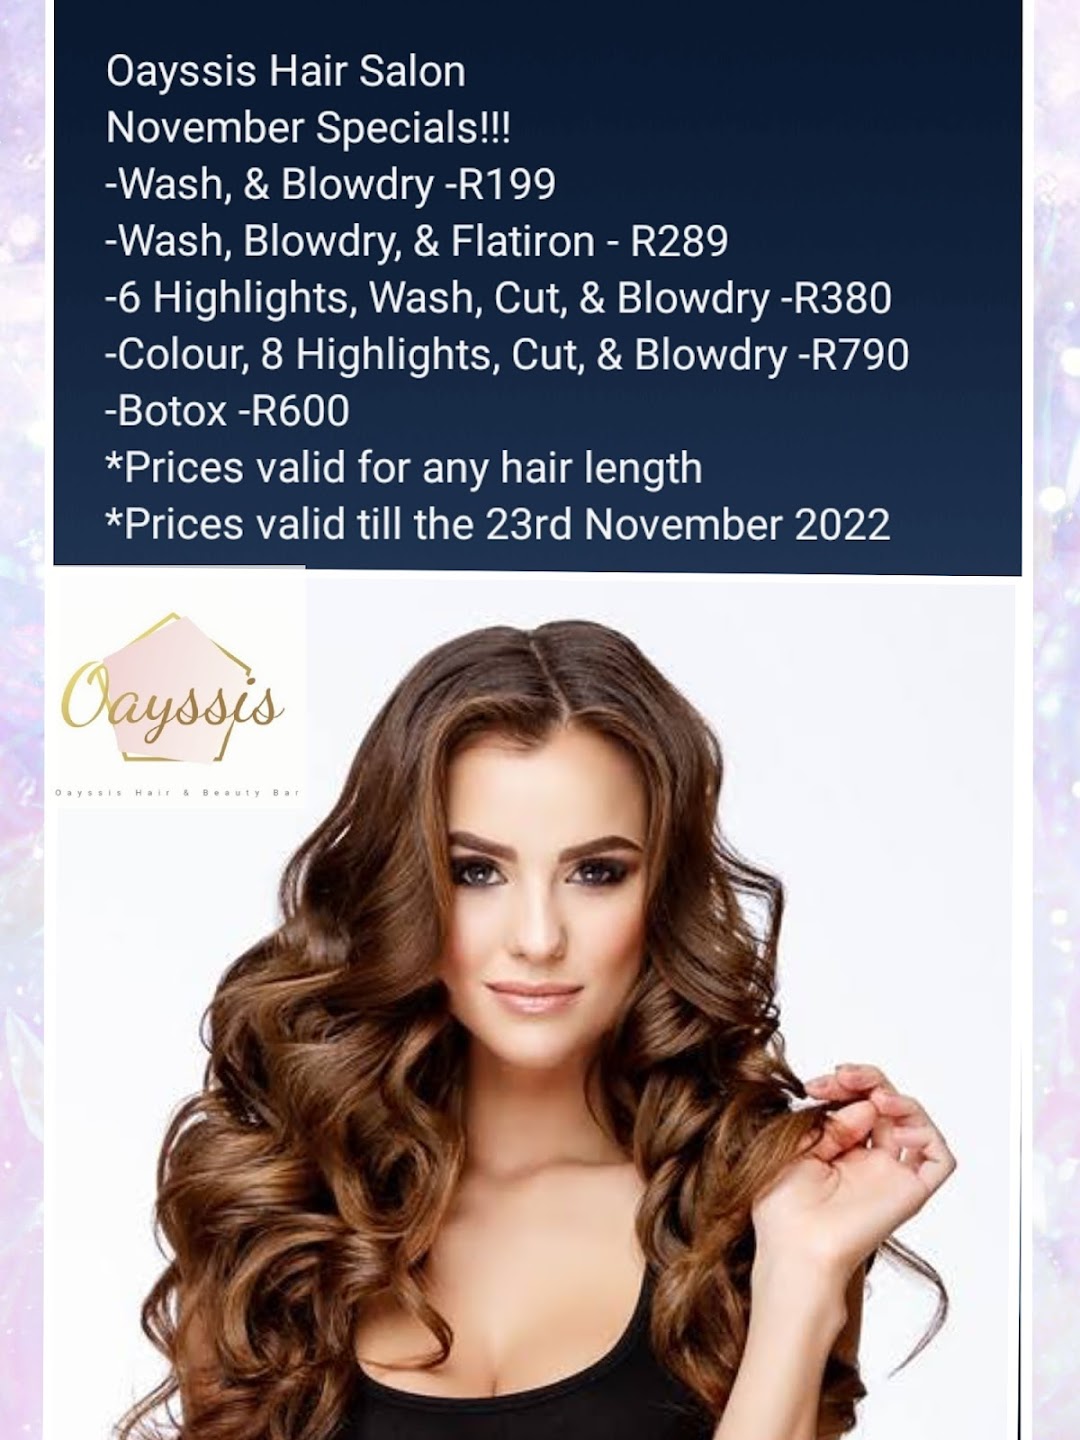 Oayssiss Hair and Beauty bar